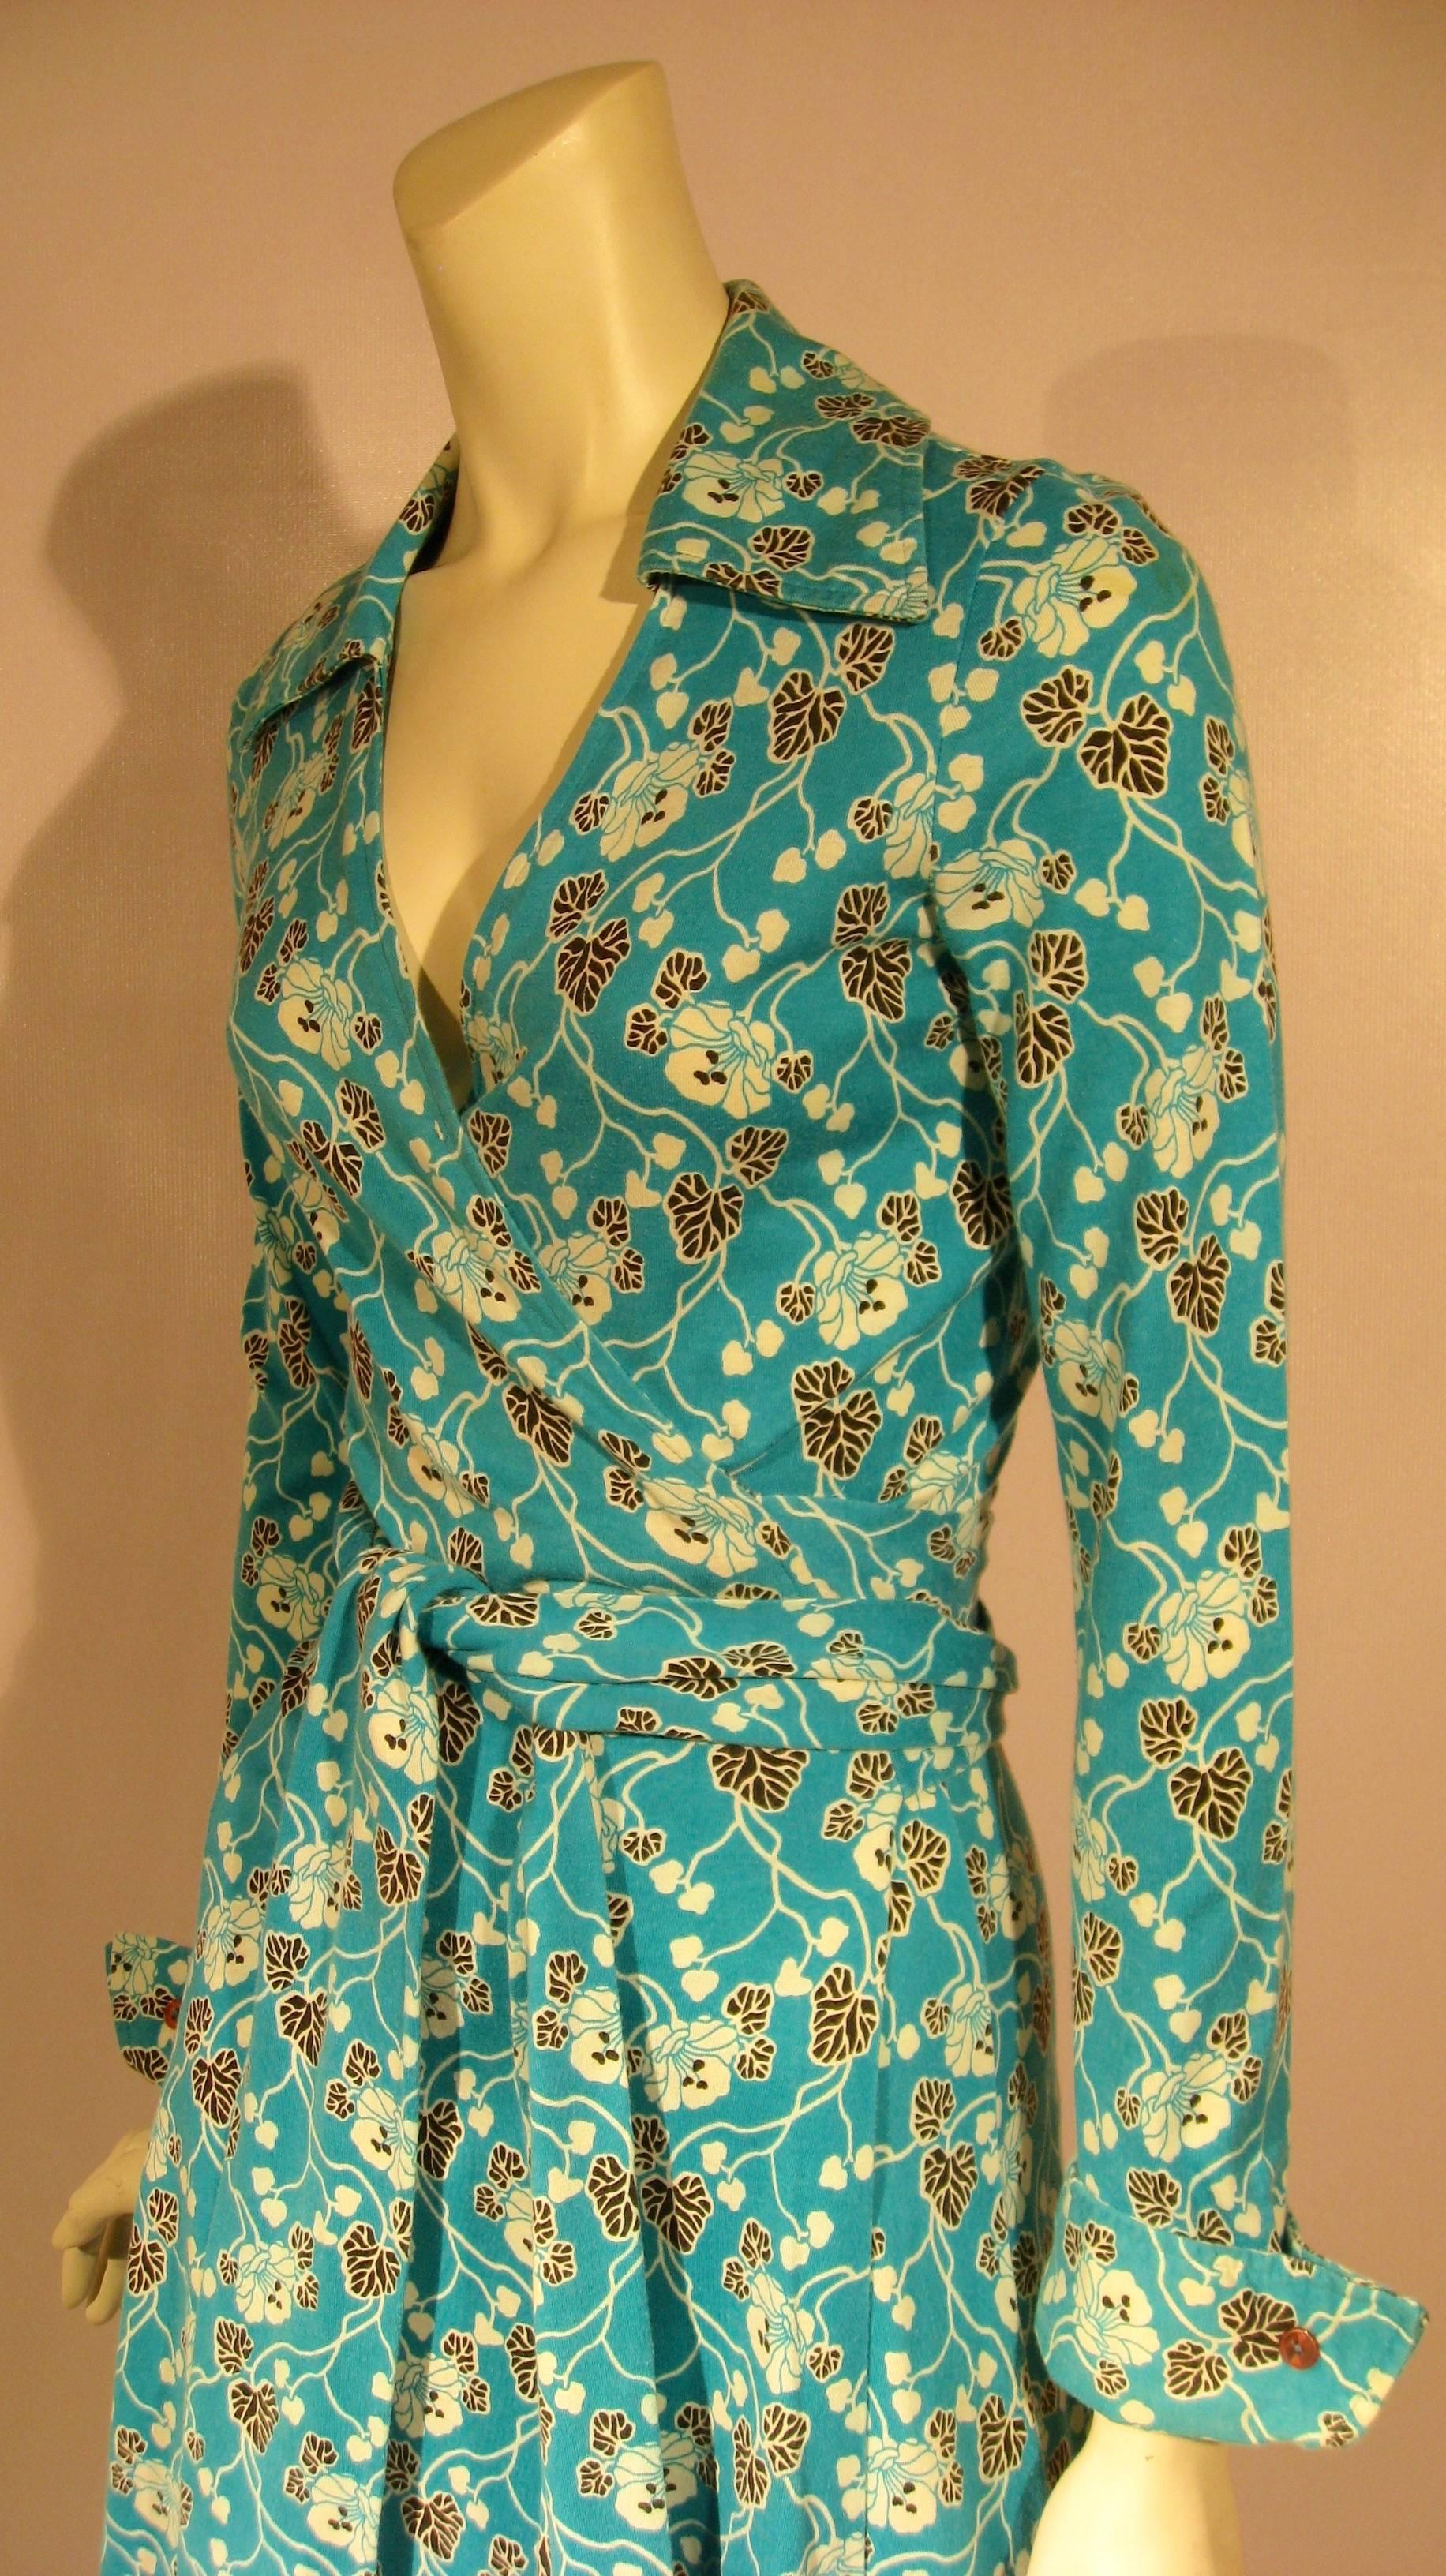 The most iconic Diane von Furstenberg design is her cotton/rayon wrap dress of the 1970s. This one is in a saturated turquoise with a floral, leaf and vine print in white and black. With the slightly elongated collar, French cuffs and waist tie that